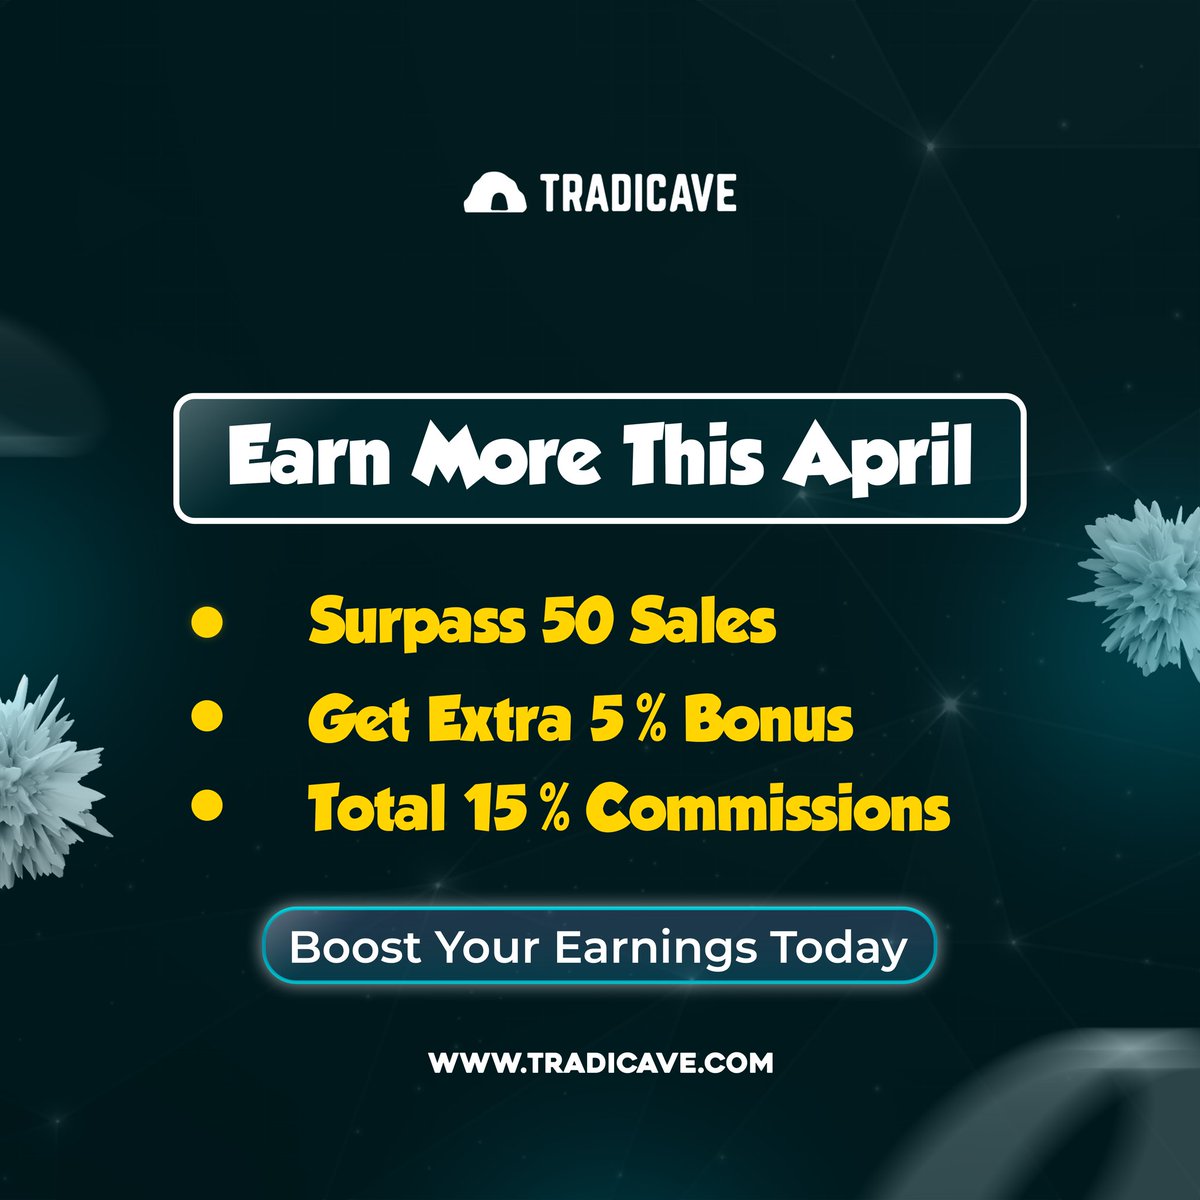 Ready to rocket your earnings this April🚀 Surpass 50 sales with Tradicave and unlock an extra 5% bonus on top of your total 15% commissions! 💰 Don't miss out on the opportunity to boost your earnings today! 💥 Join Now👇 tradicave.com/affiliate-regi… #tradicave #propfirm